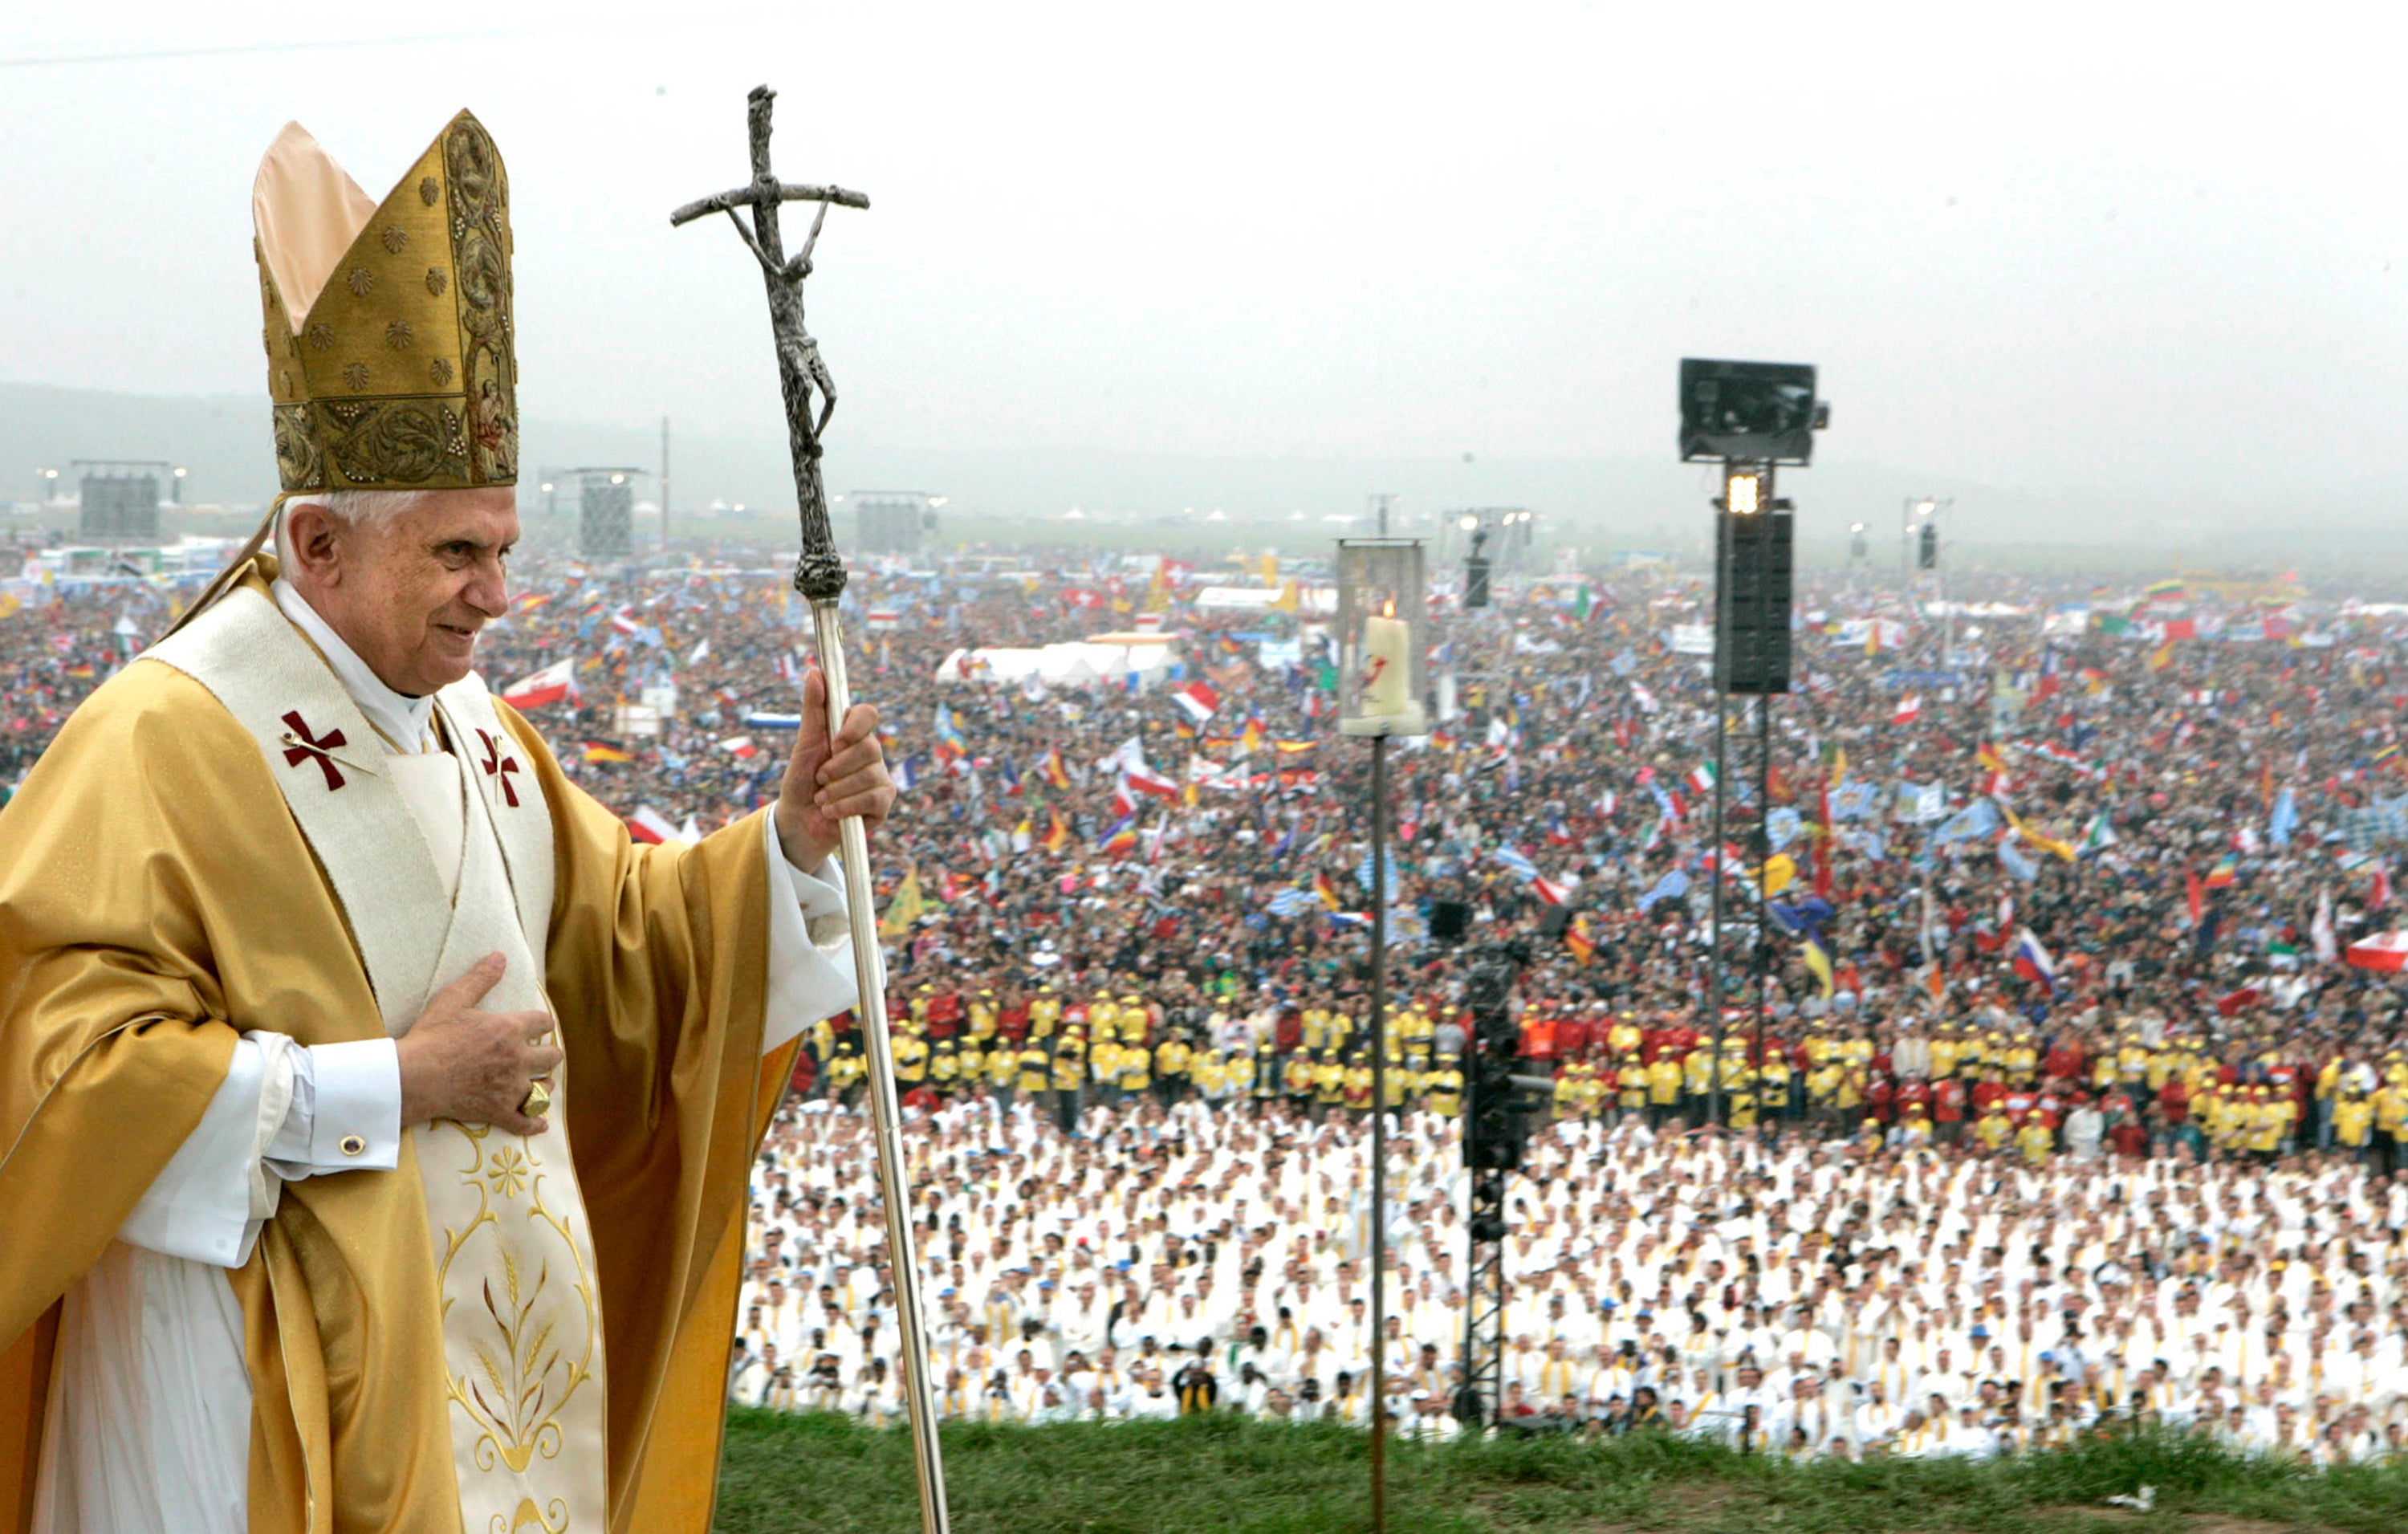 Pope Benedict XVI at Mass of World Youth Day near Cologne in August 2005